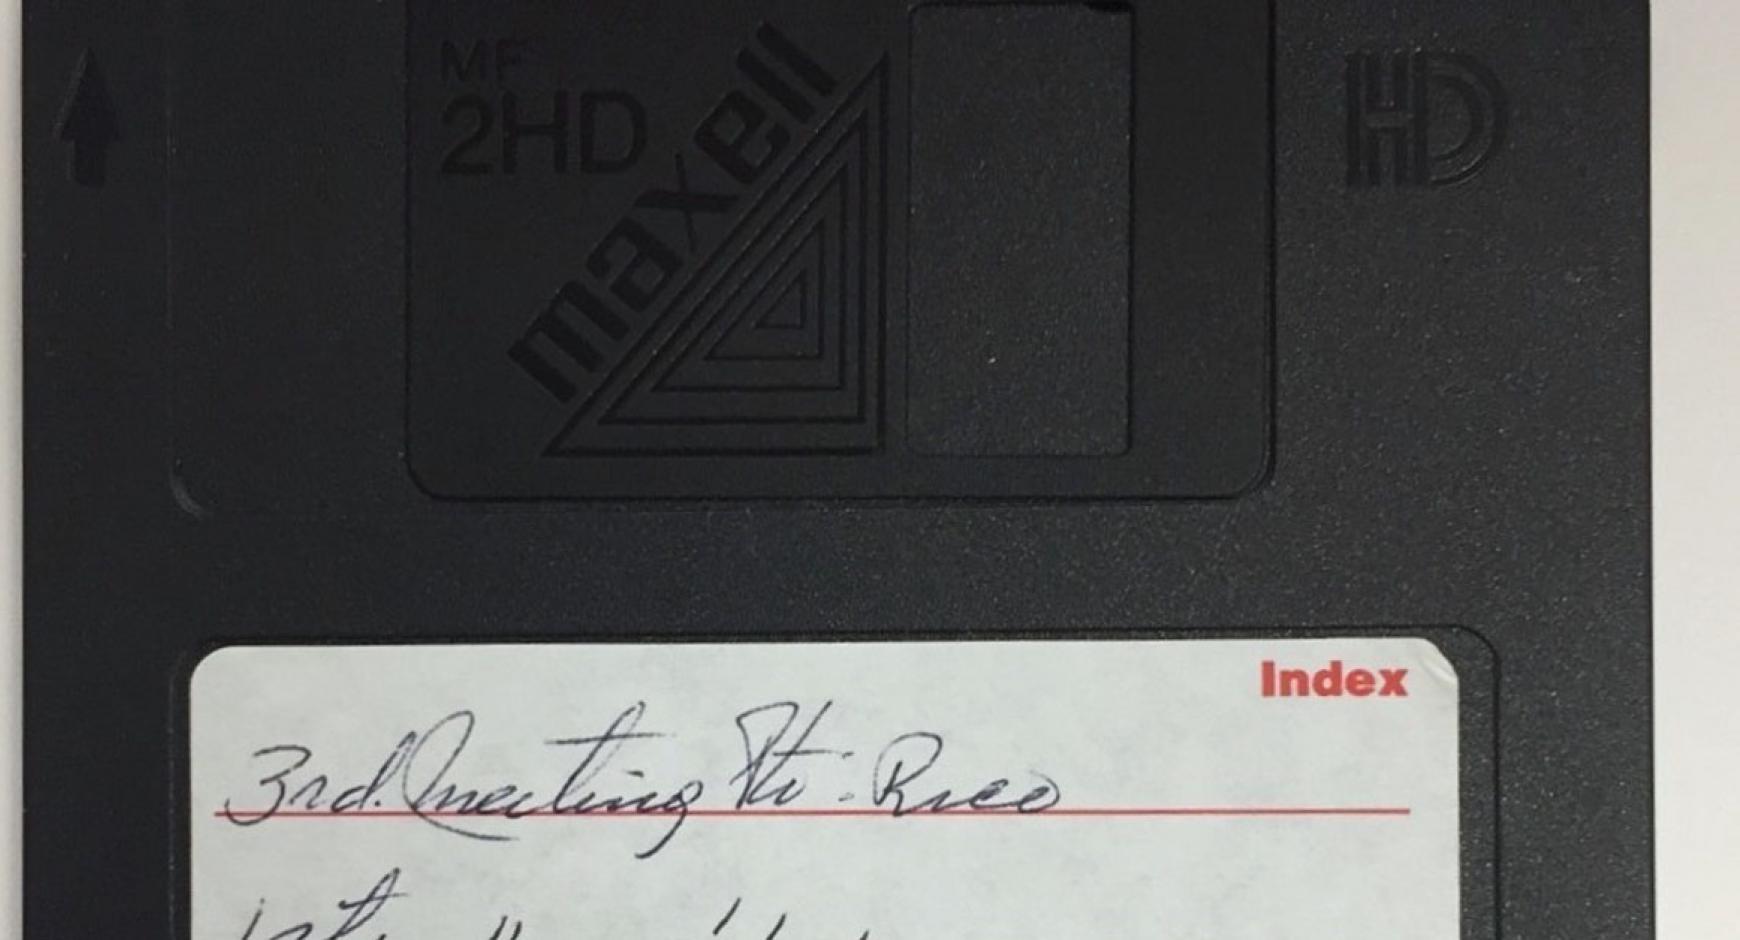 detail of a Maxell 3.5 inch floppy disk with Spanish writing on the label